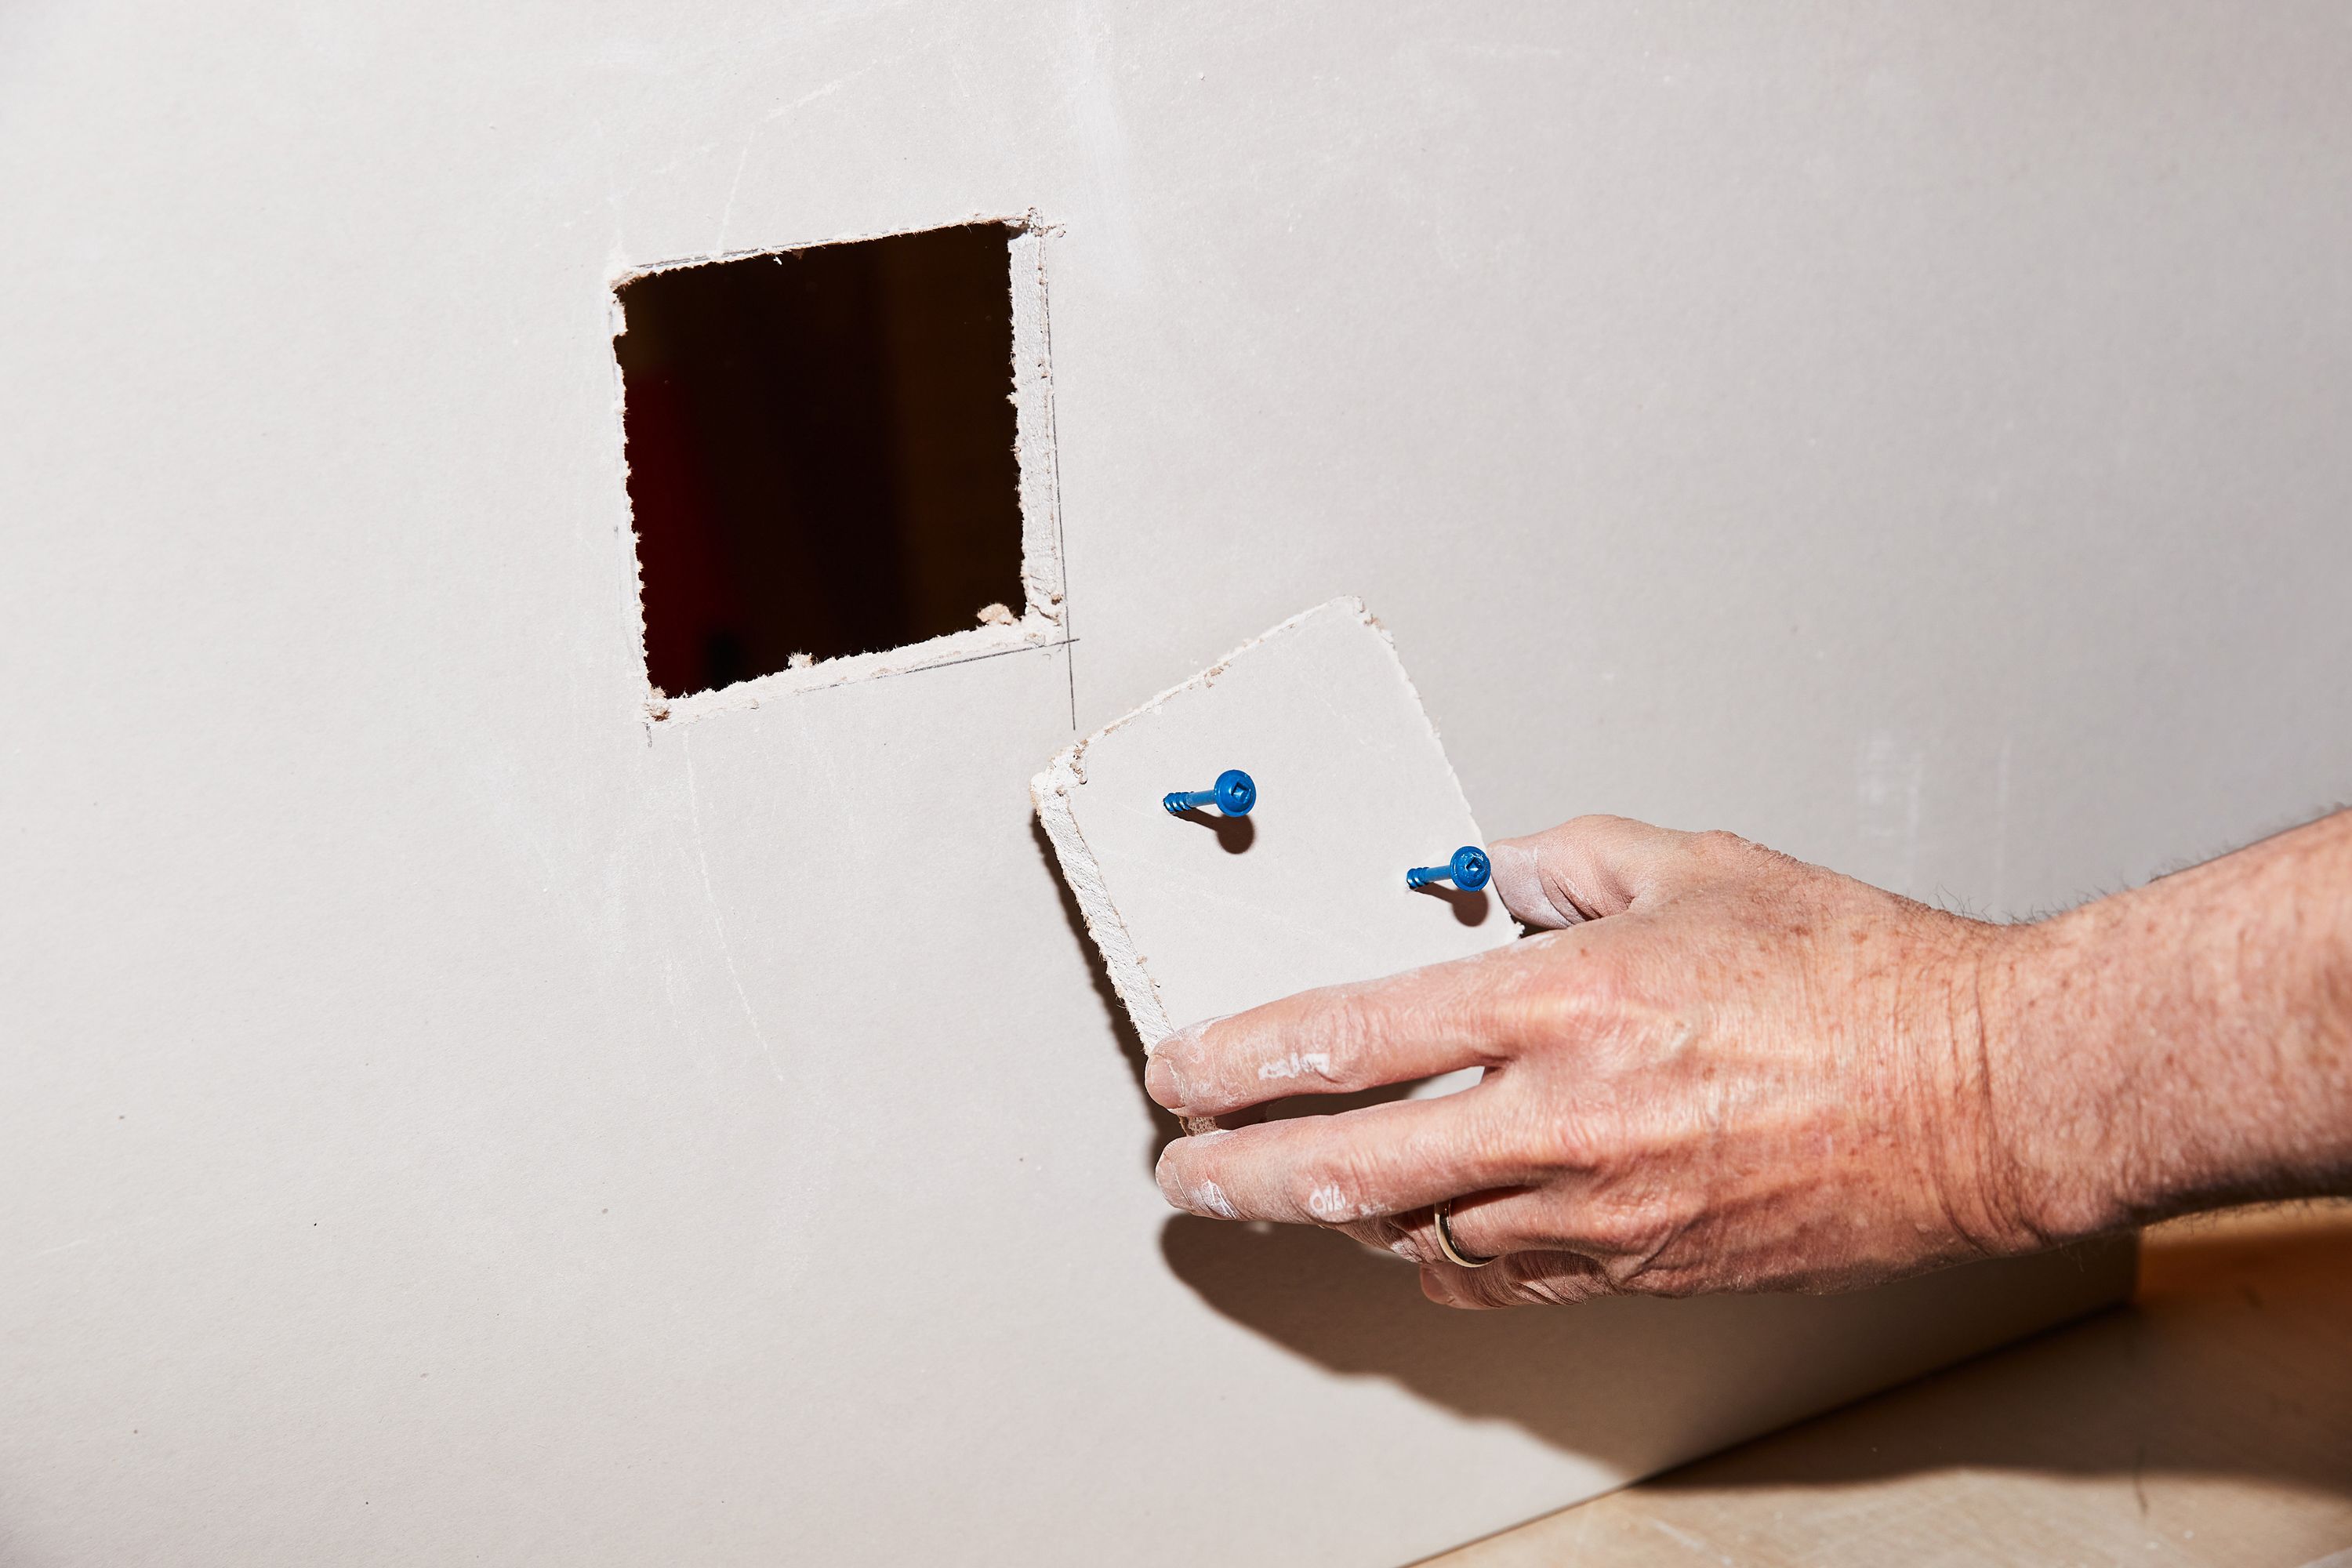 How to Repair Peeling Drywall Tape » The Money Pit